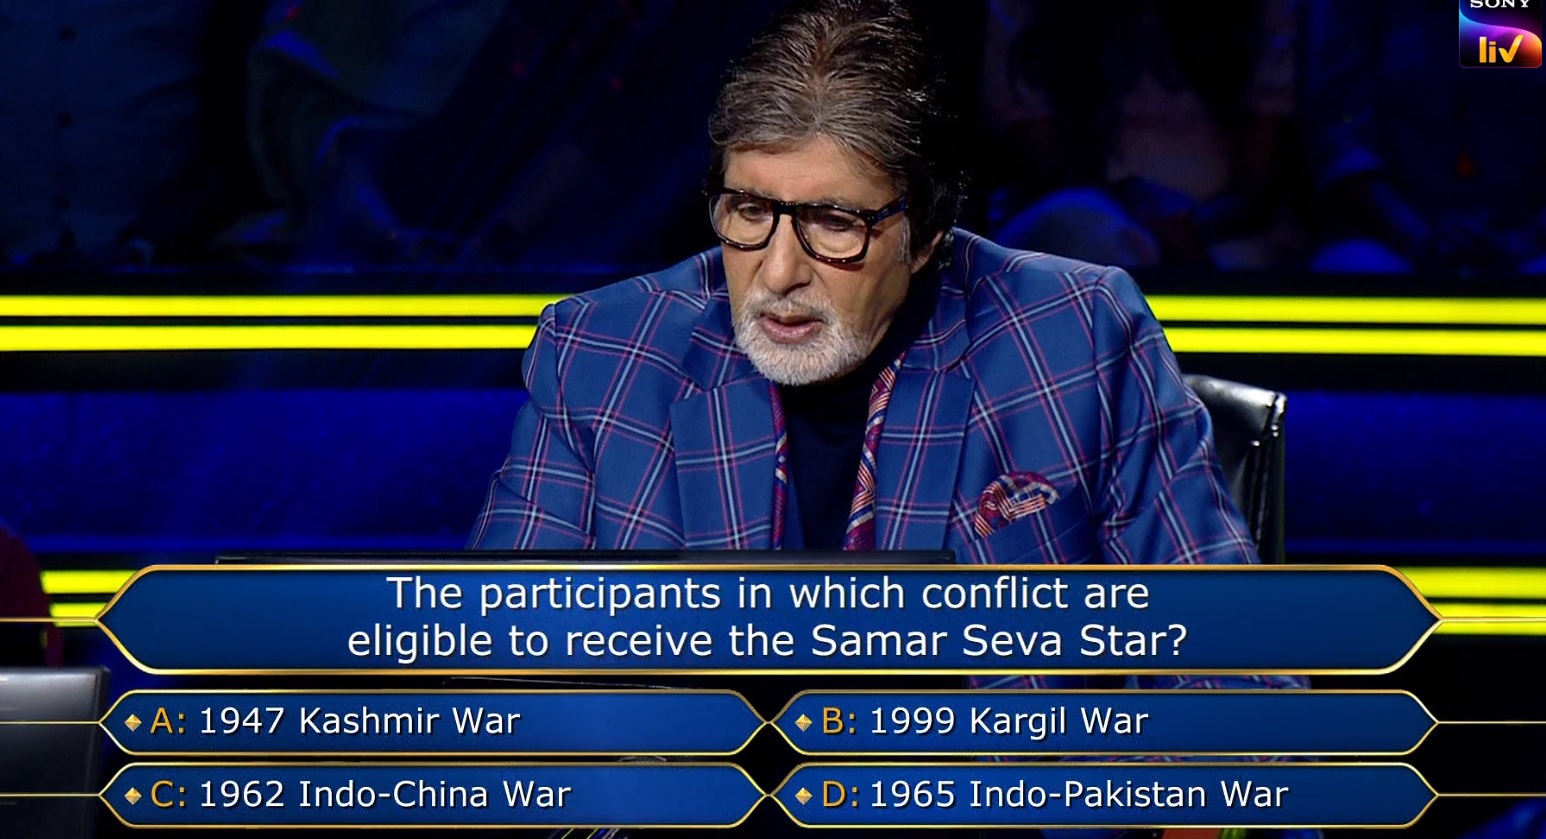 Ques : The participants in which conflict are eligible to receive the Samar Seva Star?